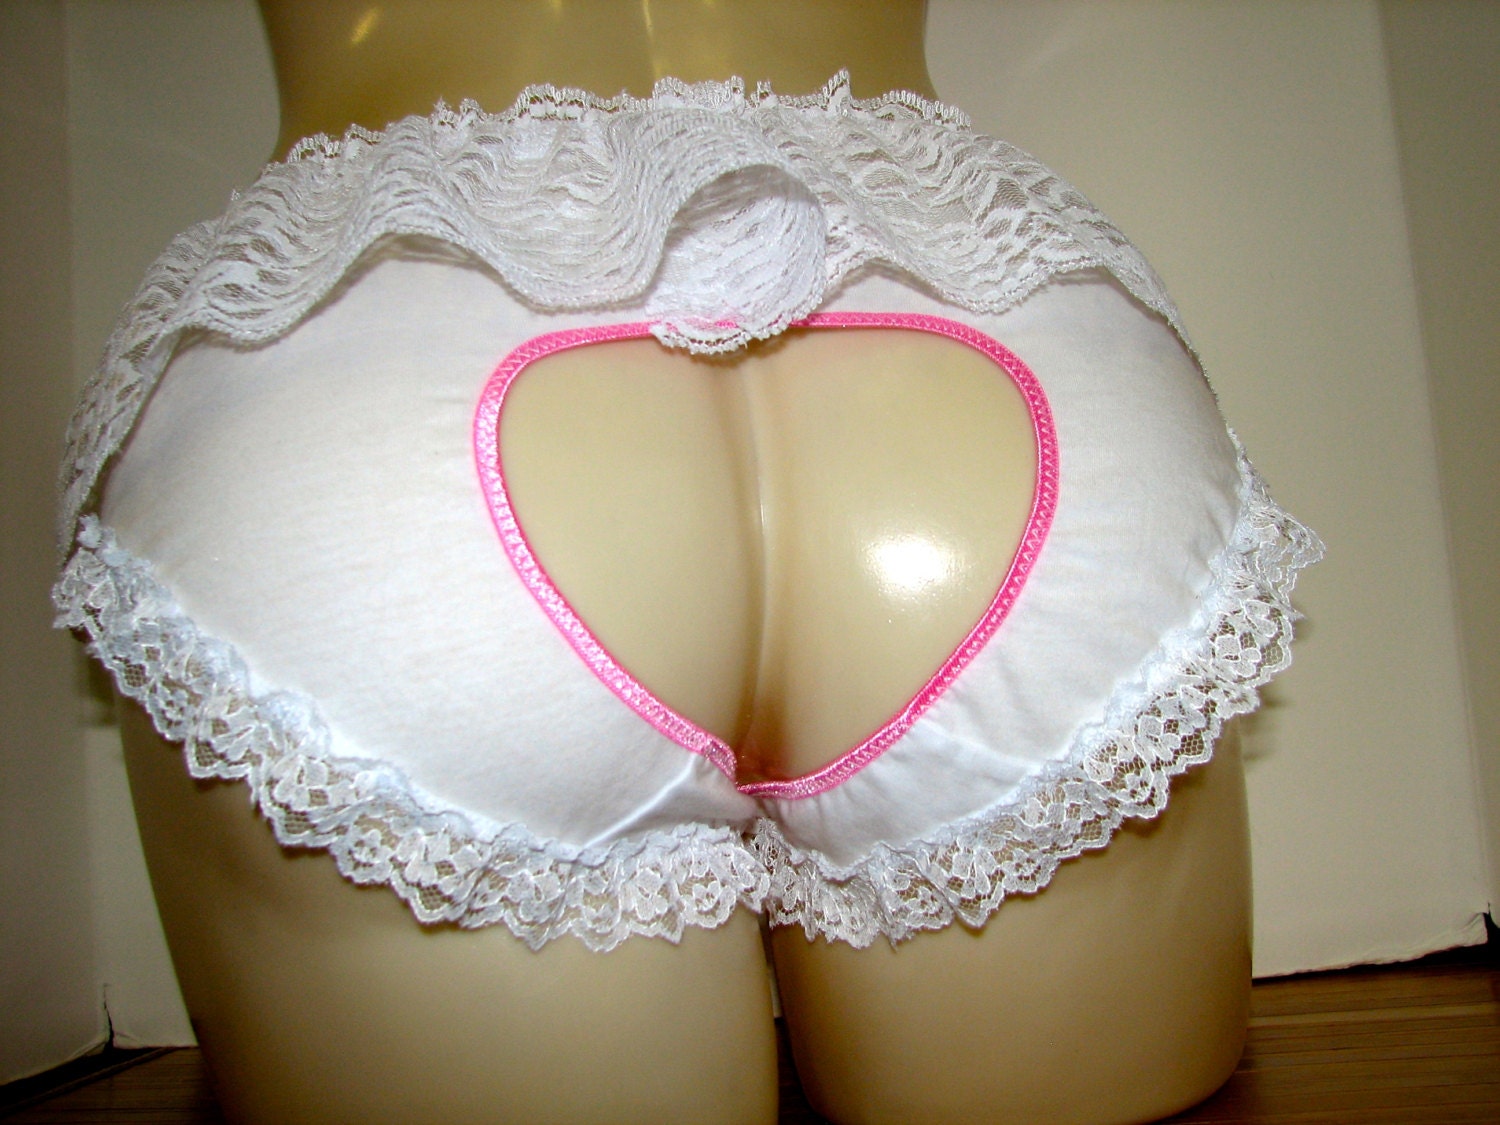 Lacy Crotchless Sissy Panties Vintage Or Pinup Girl Flare